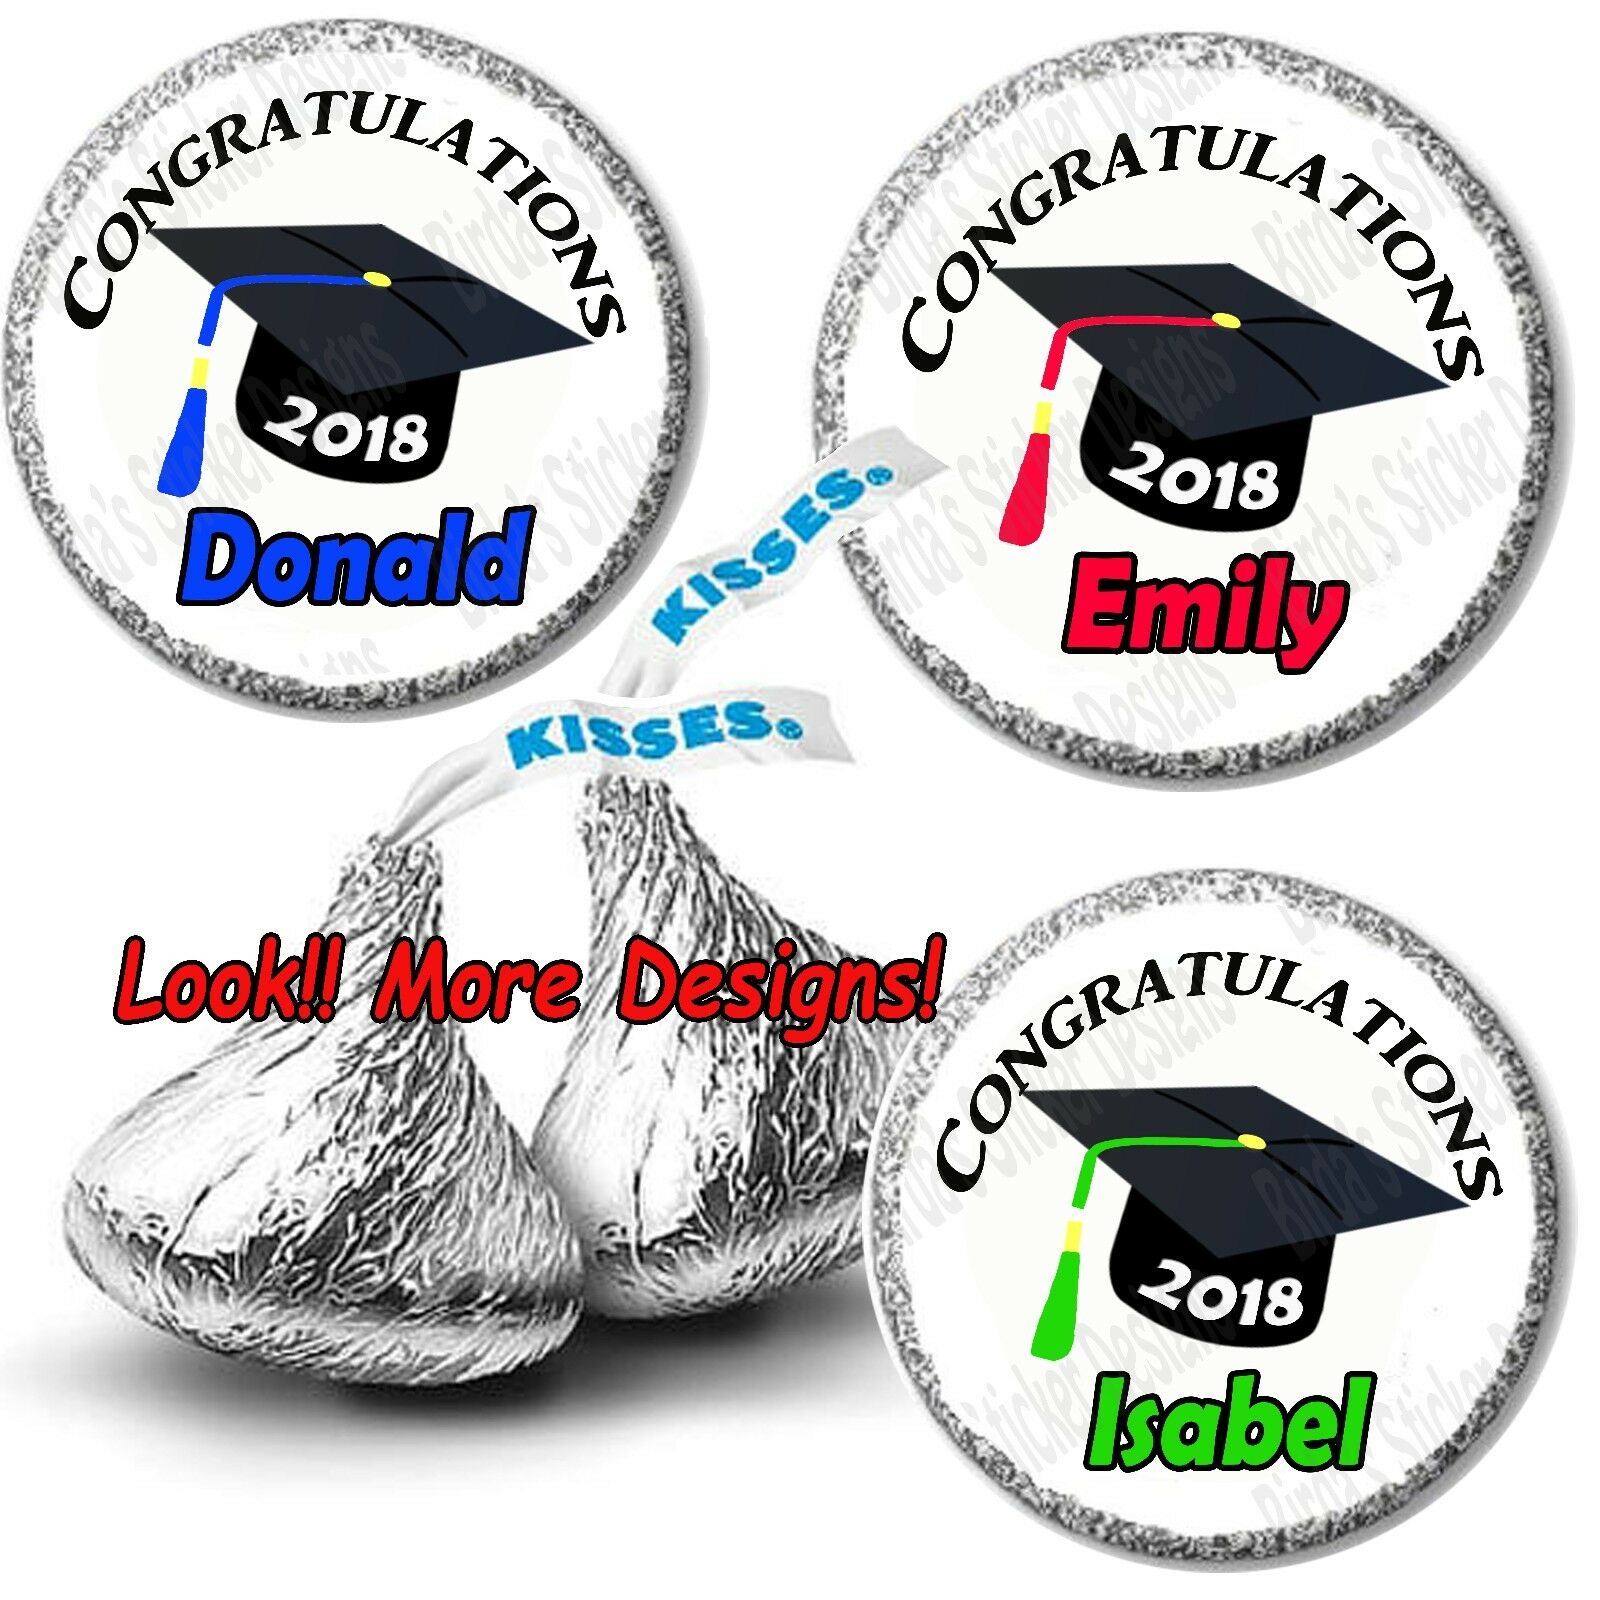 108 Hershey Kiss Stickers Labels Congratulations 2019 Graduation  Personalized.